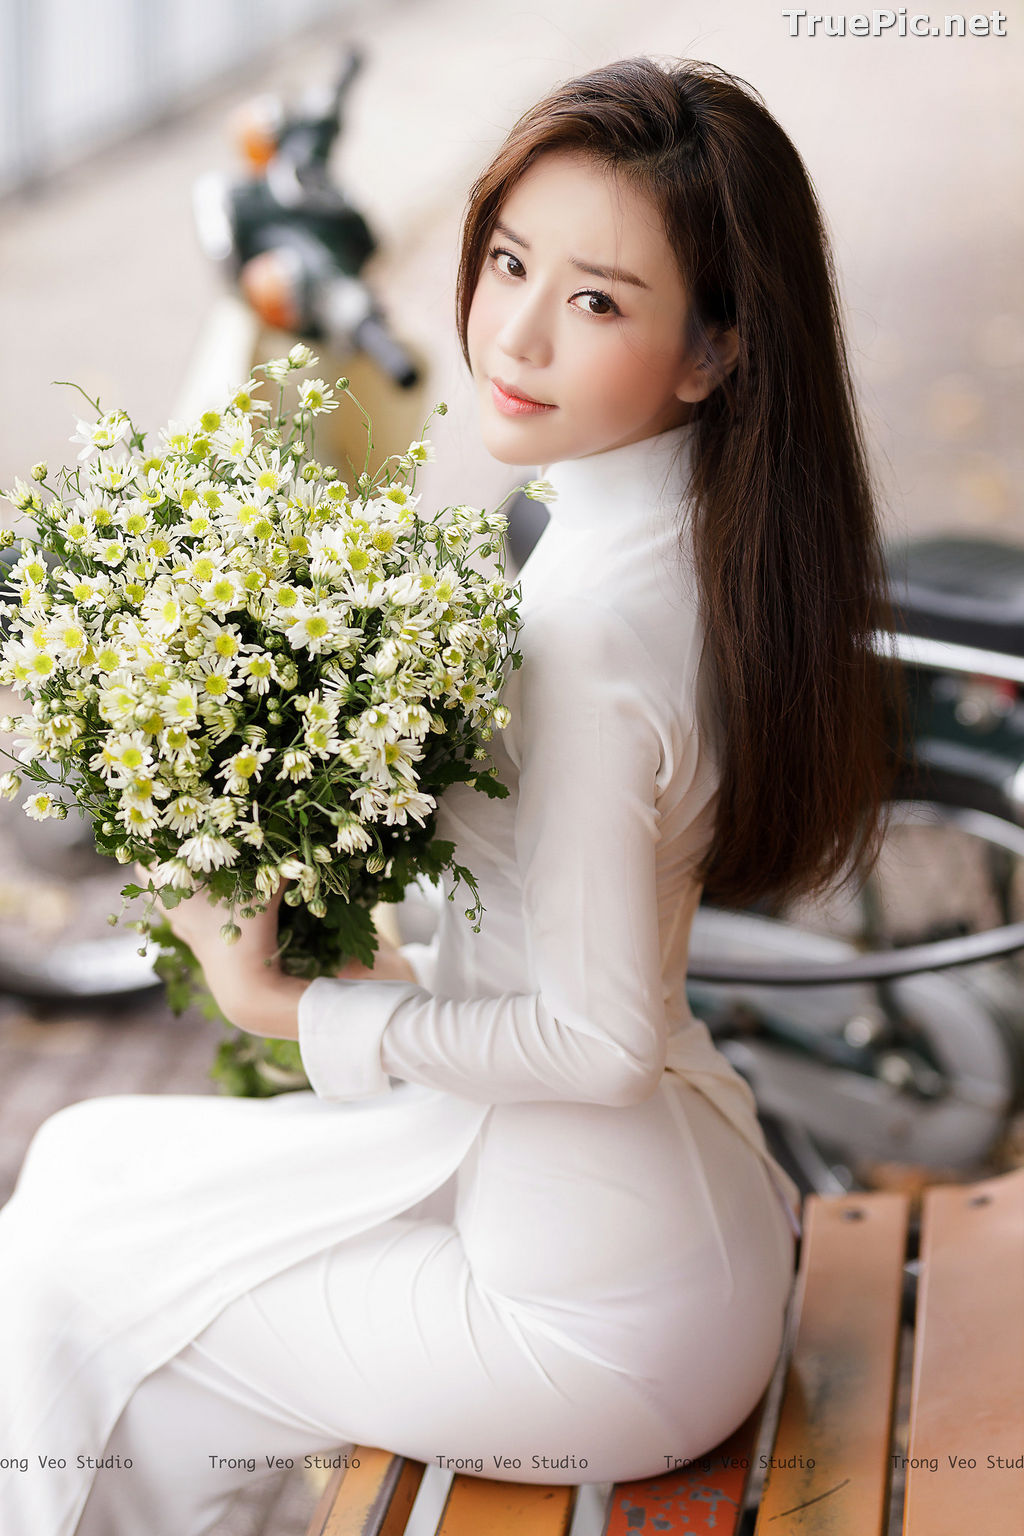 Image The Beauty of Vietnamese Girls with Traditional Dress (Ao Dai) #5 - TruePic.net - Picture-29